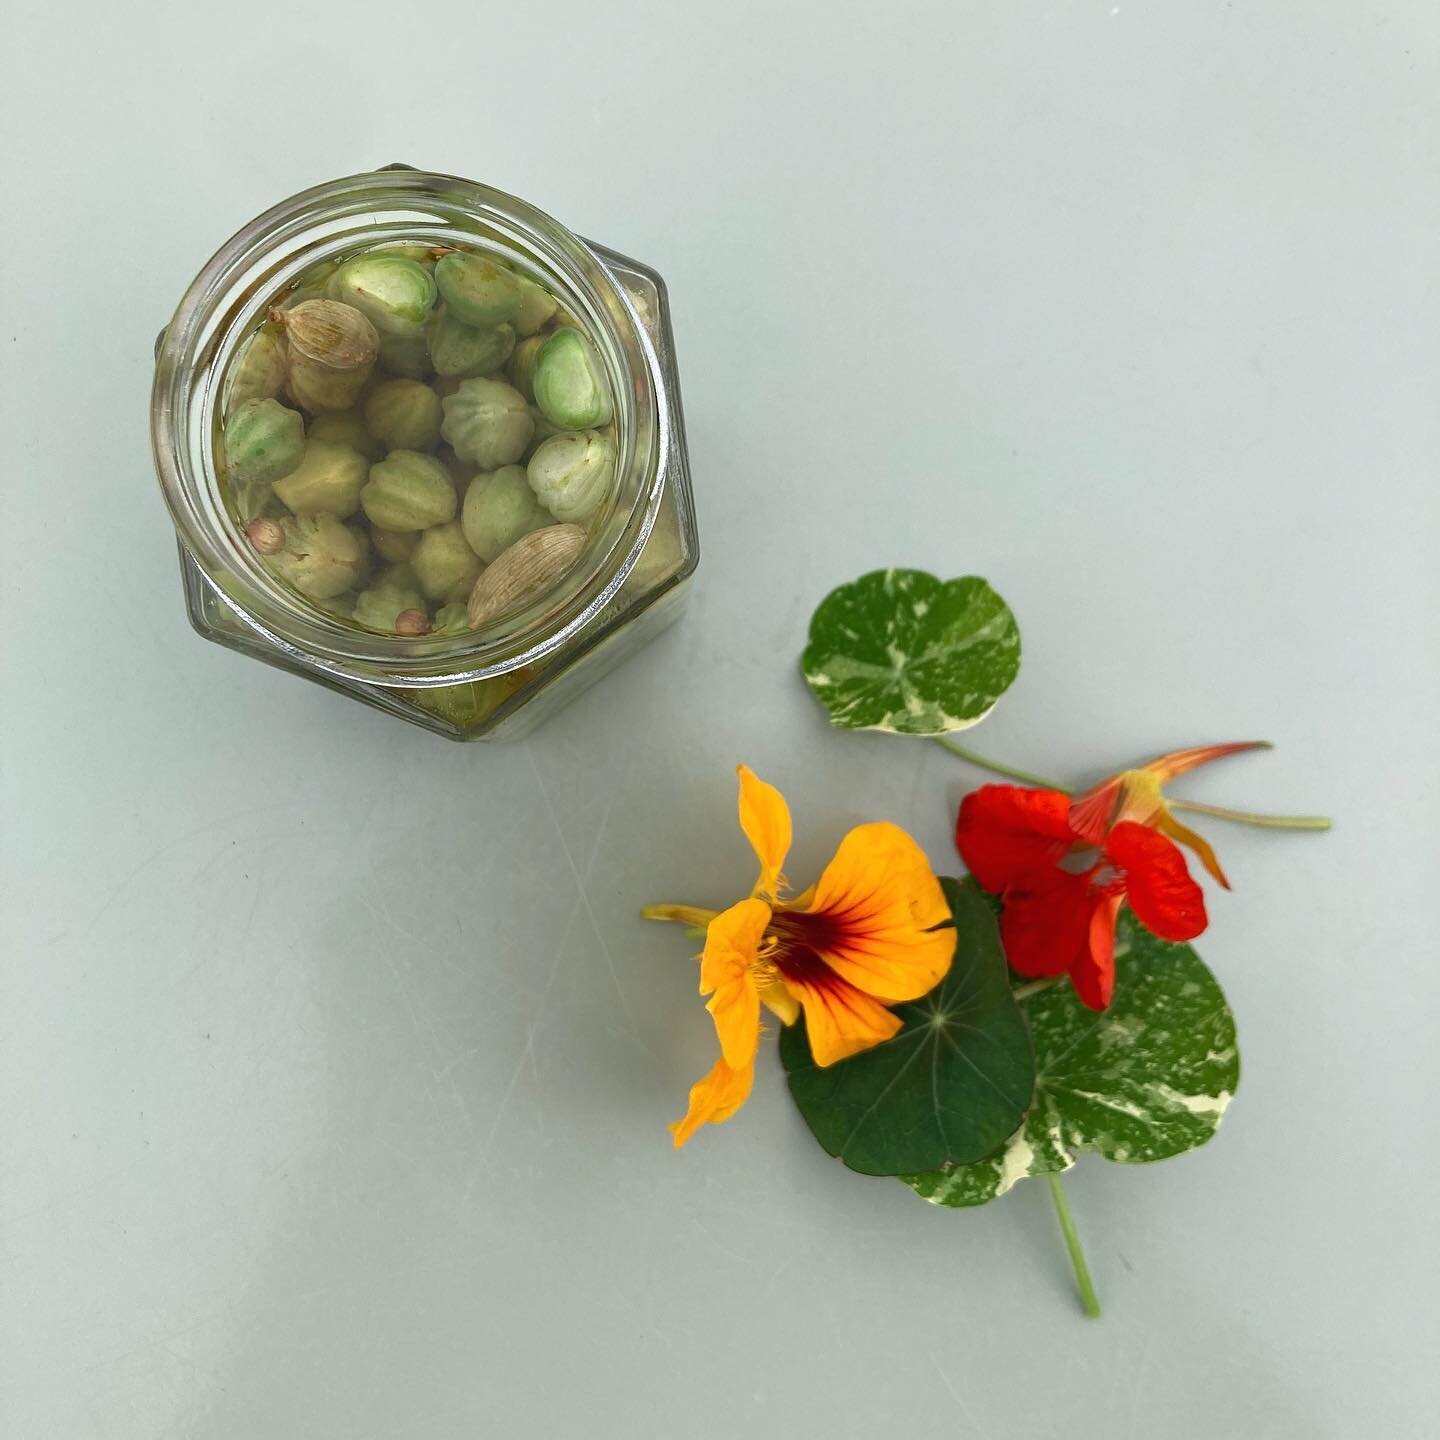 The nasturtiums have produced enough seeds to take over the world this year!

After collecting more than enough seed for next year&rsquo;s plants, there was still plenty left. So I&rsquo;ve tried something new (for me)&hellip; nasturtium capers. 

Gr